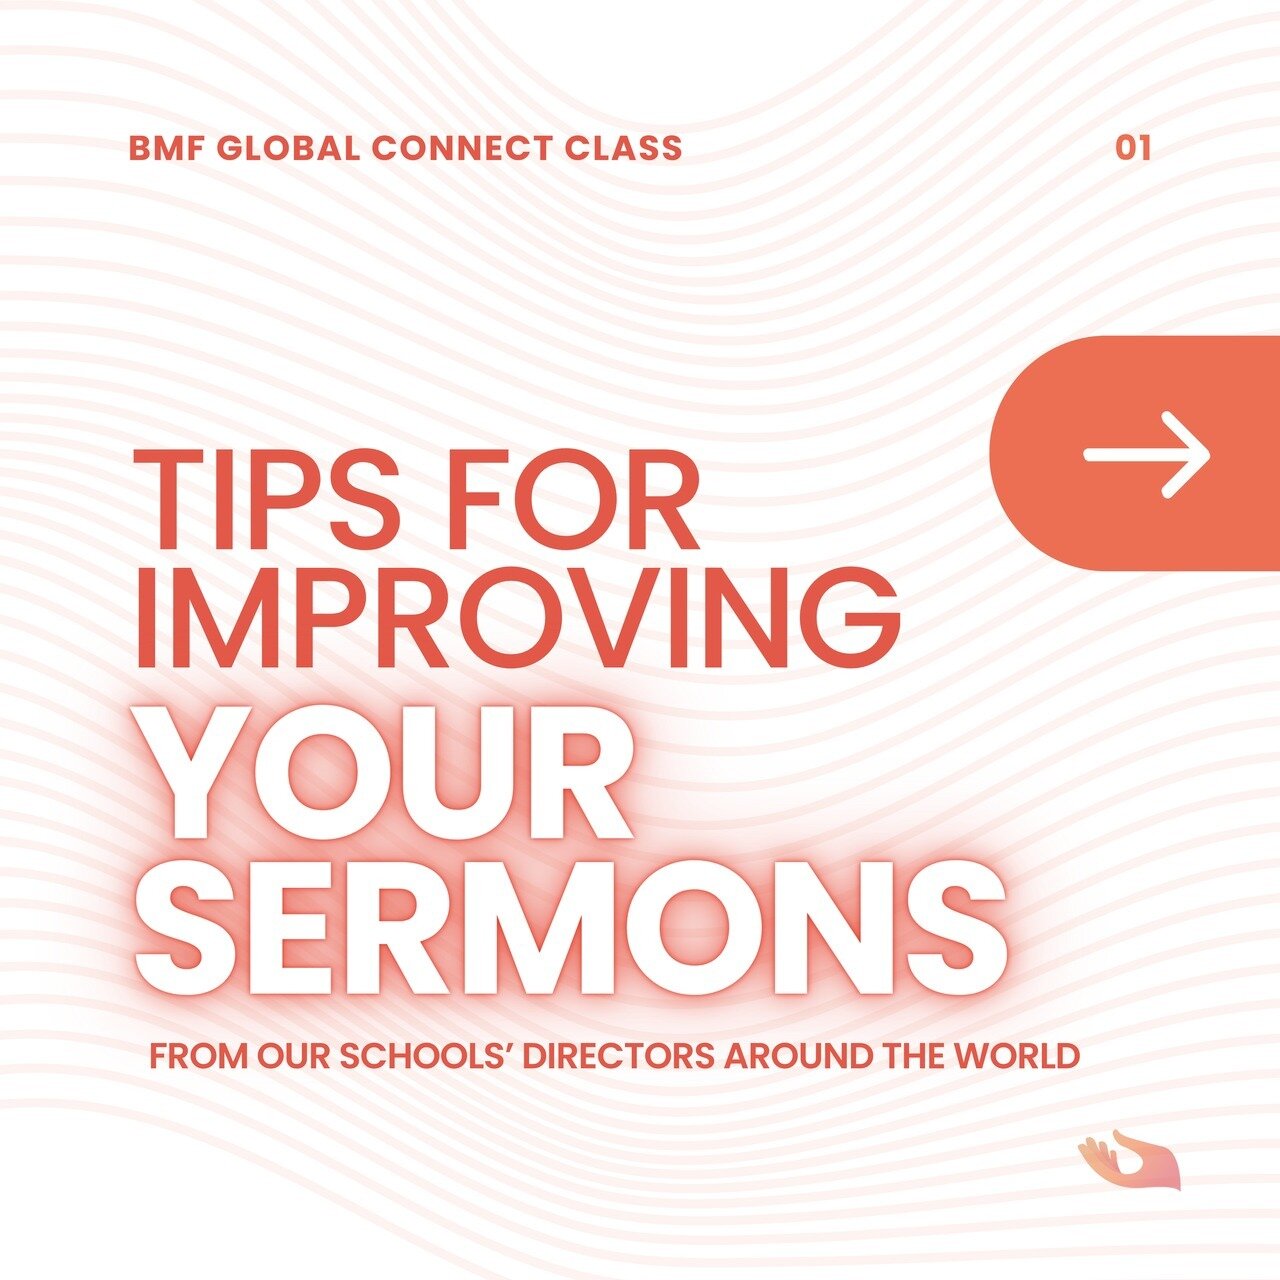 Want some preaching tips? Swipe to find our School of Missions directors' best sermon tips. Save this post to refer to when you're preparing your next sermon.⁠
⁠
#bmf #beammissionsfoundation #preaching #preachingtips #sermon #sermontips